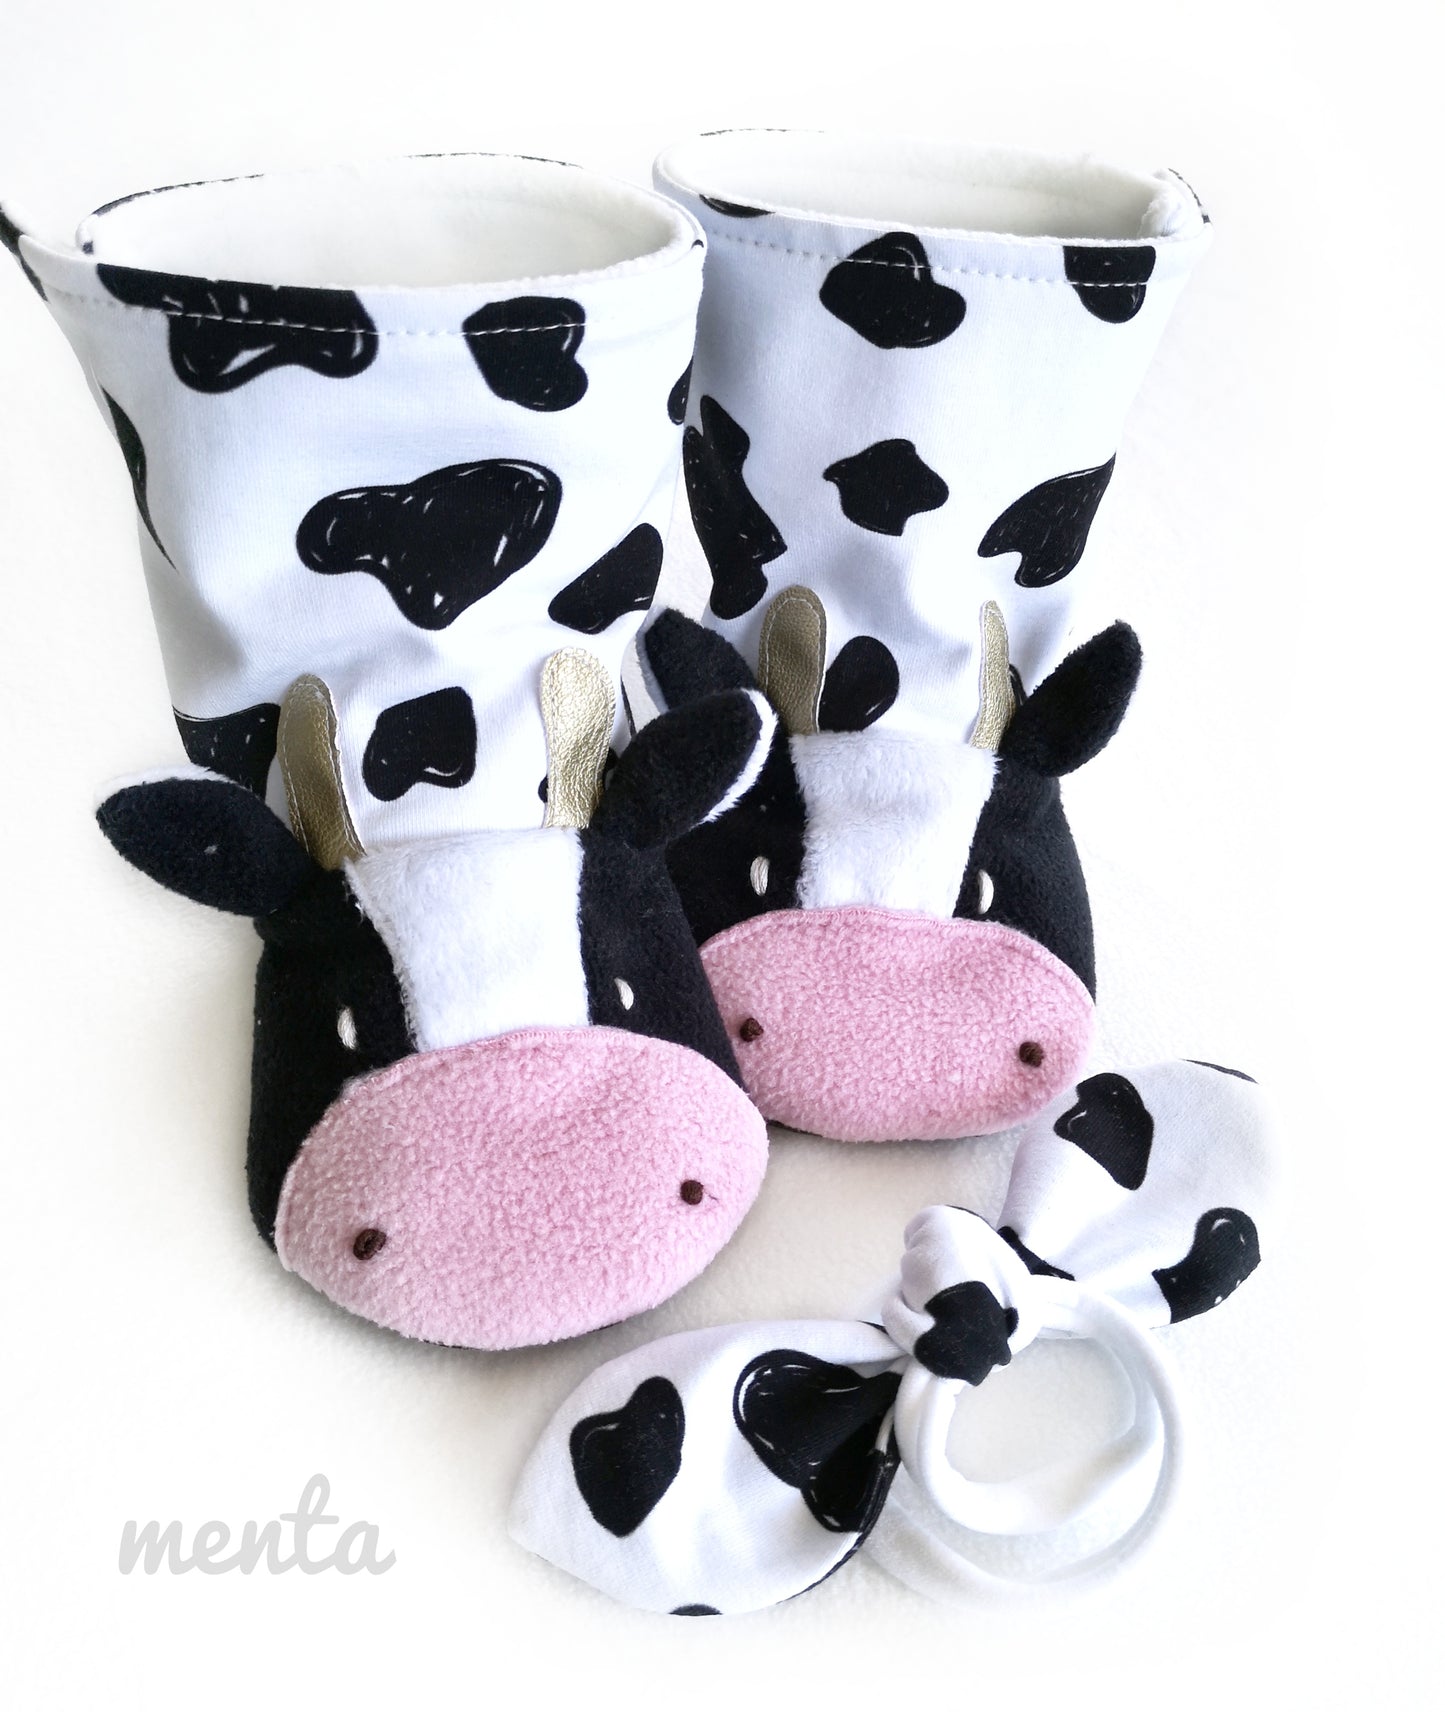 Baby Cow Add-on